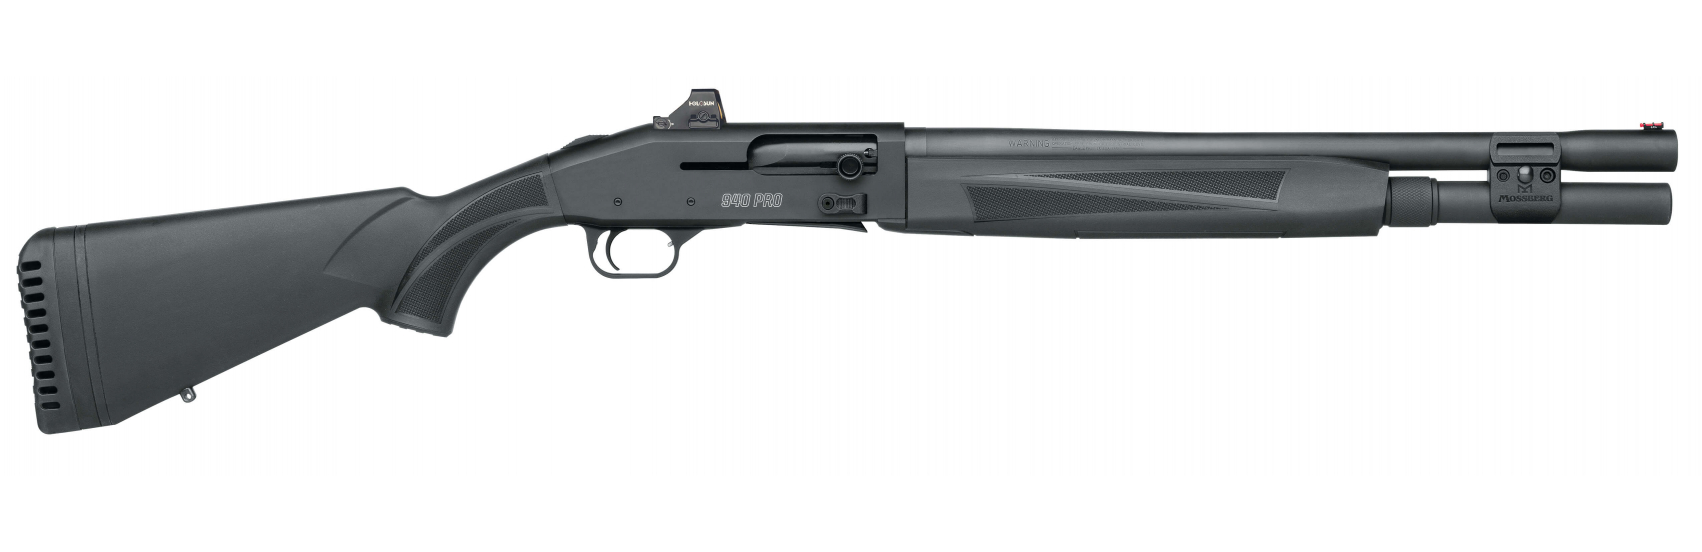 Mossberg 940 Pro Tactical, 12 Gauge, With Holosun HS407K Red Dot 85161-img-0